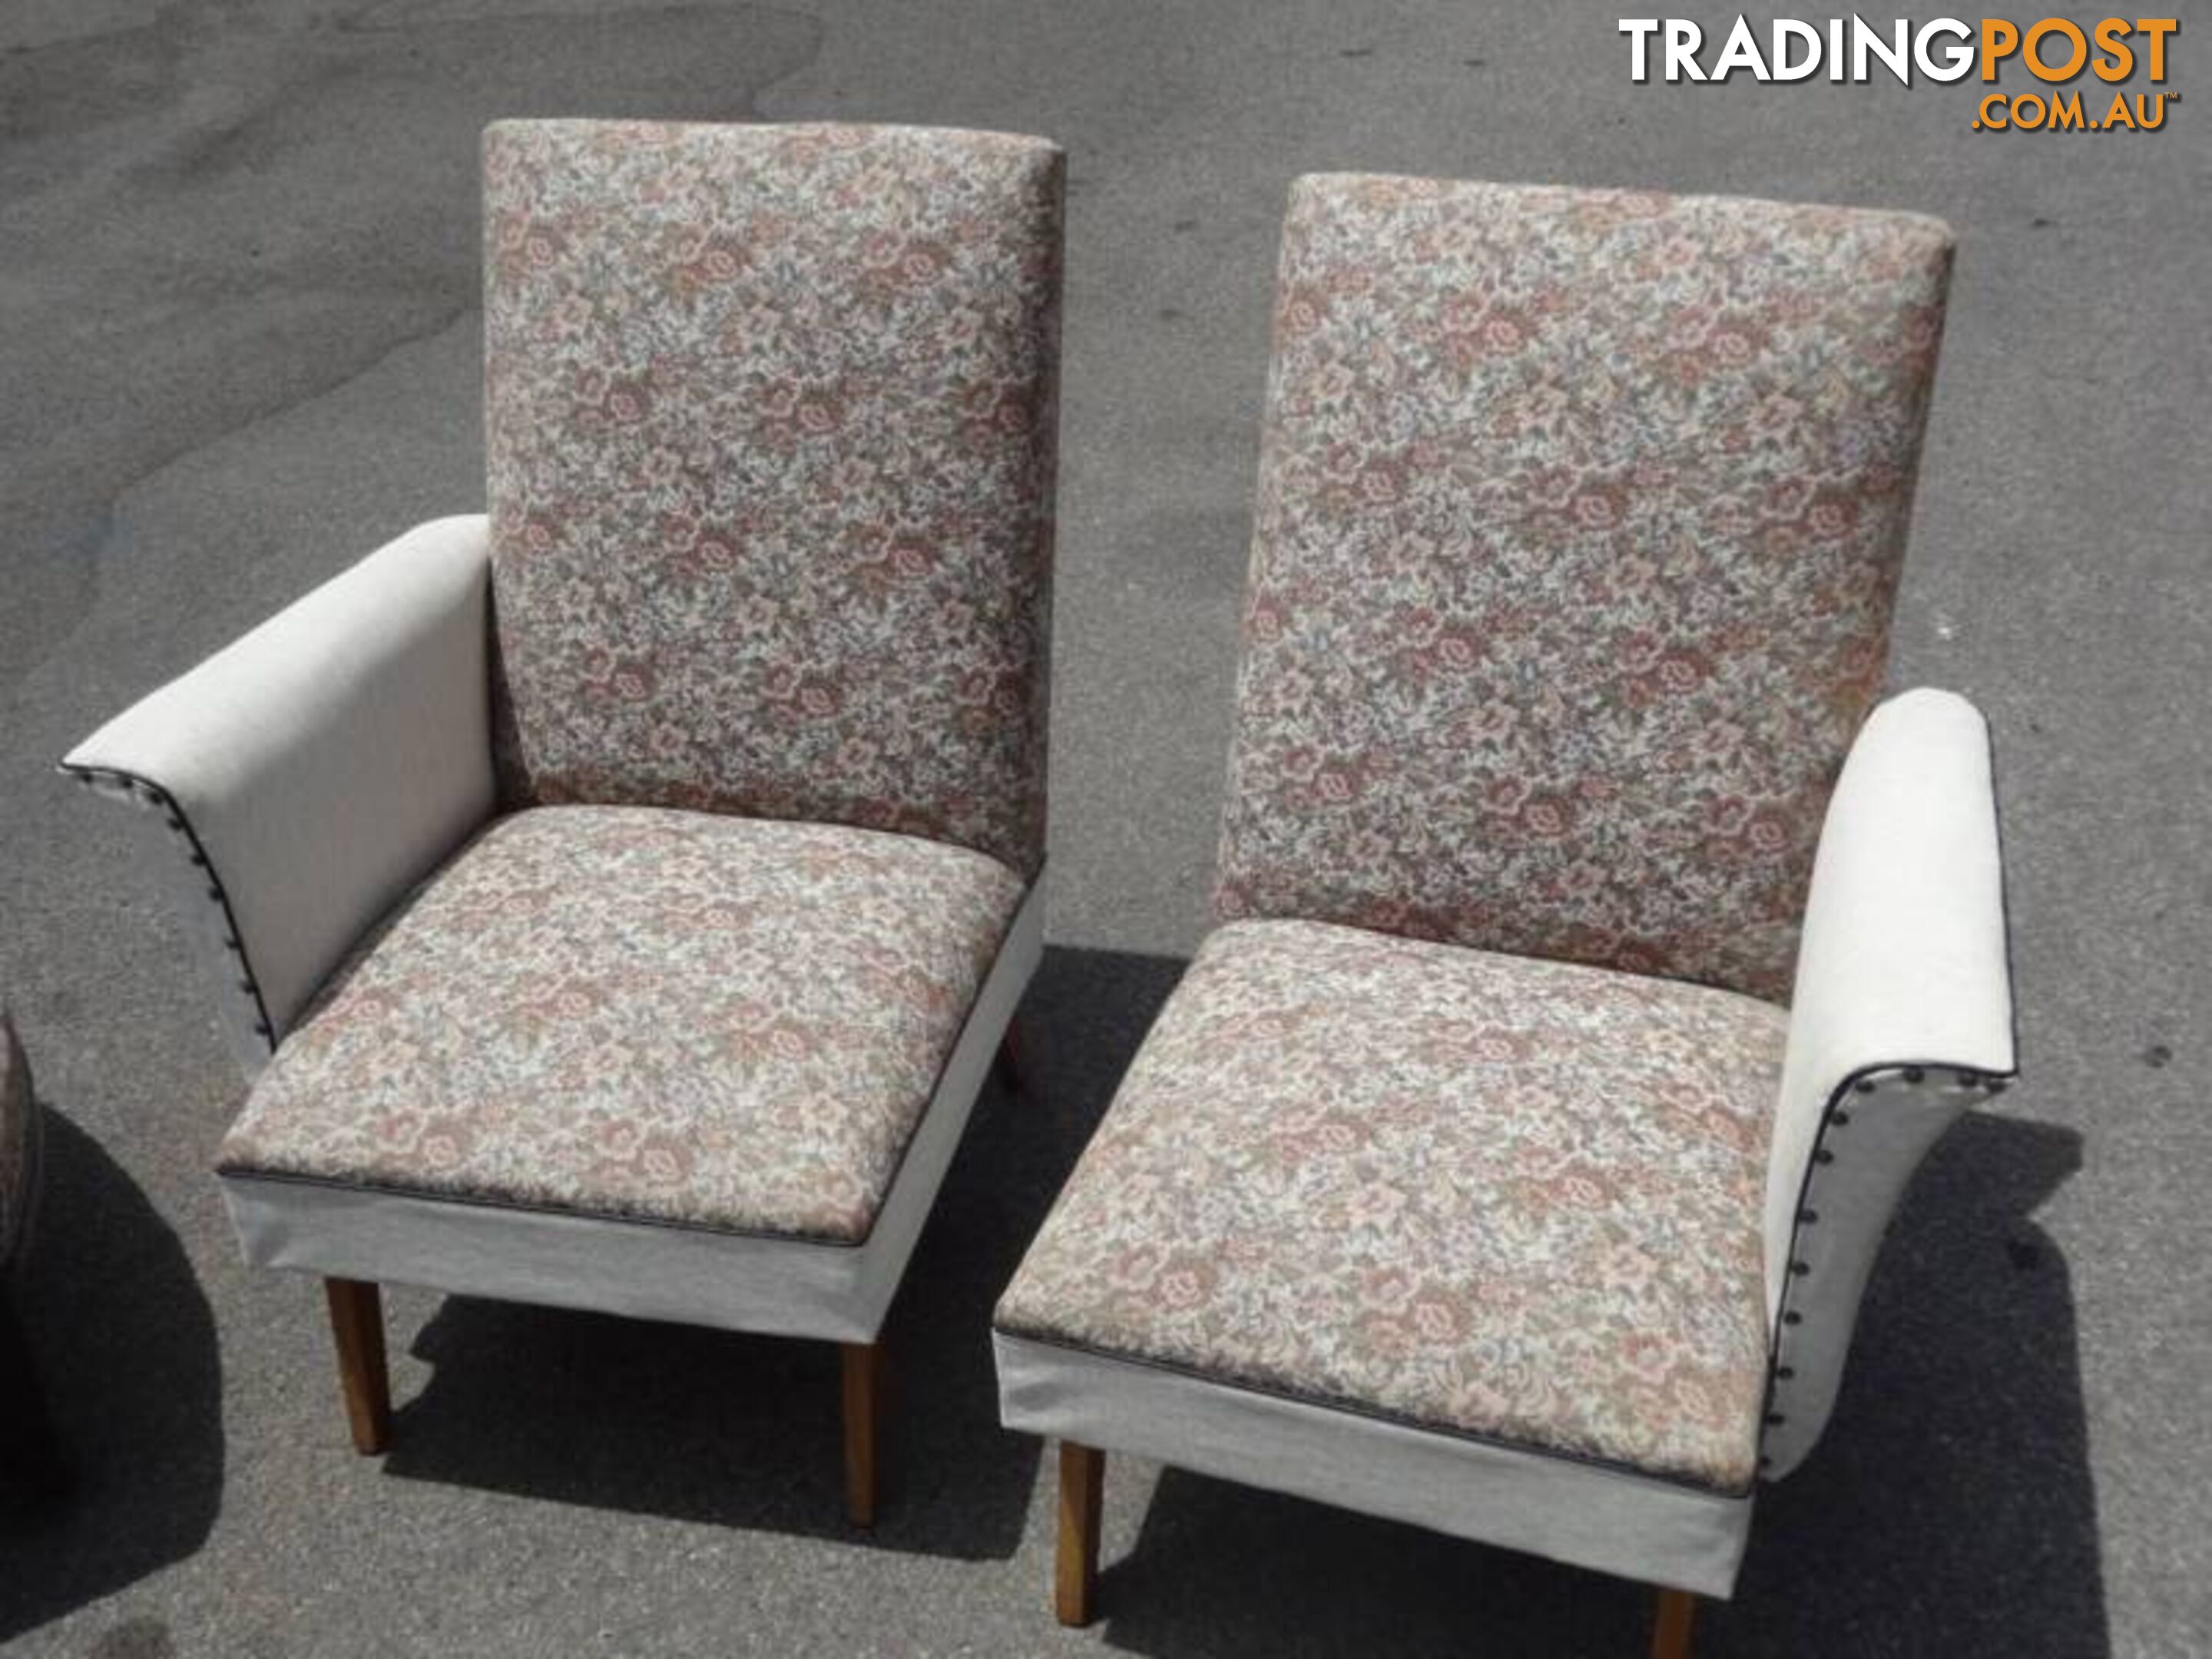 Vintage 1950's Chaise Lounge & Matching Fabric/Vinyl Armchairs